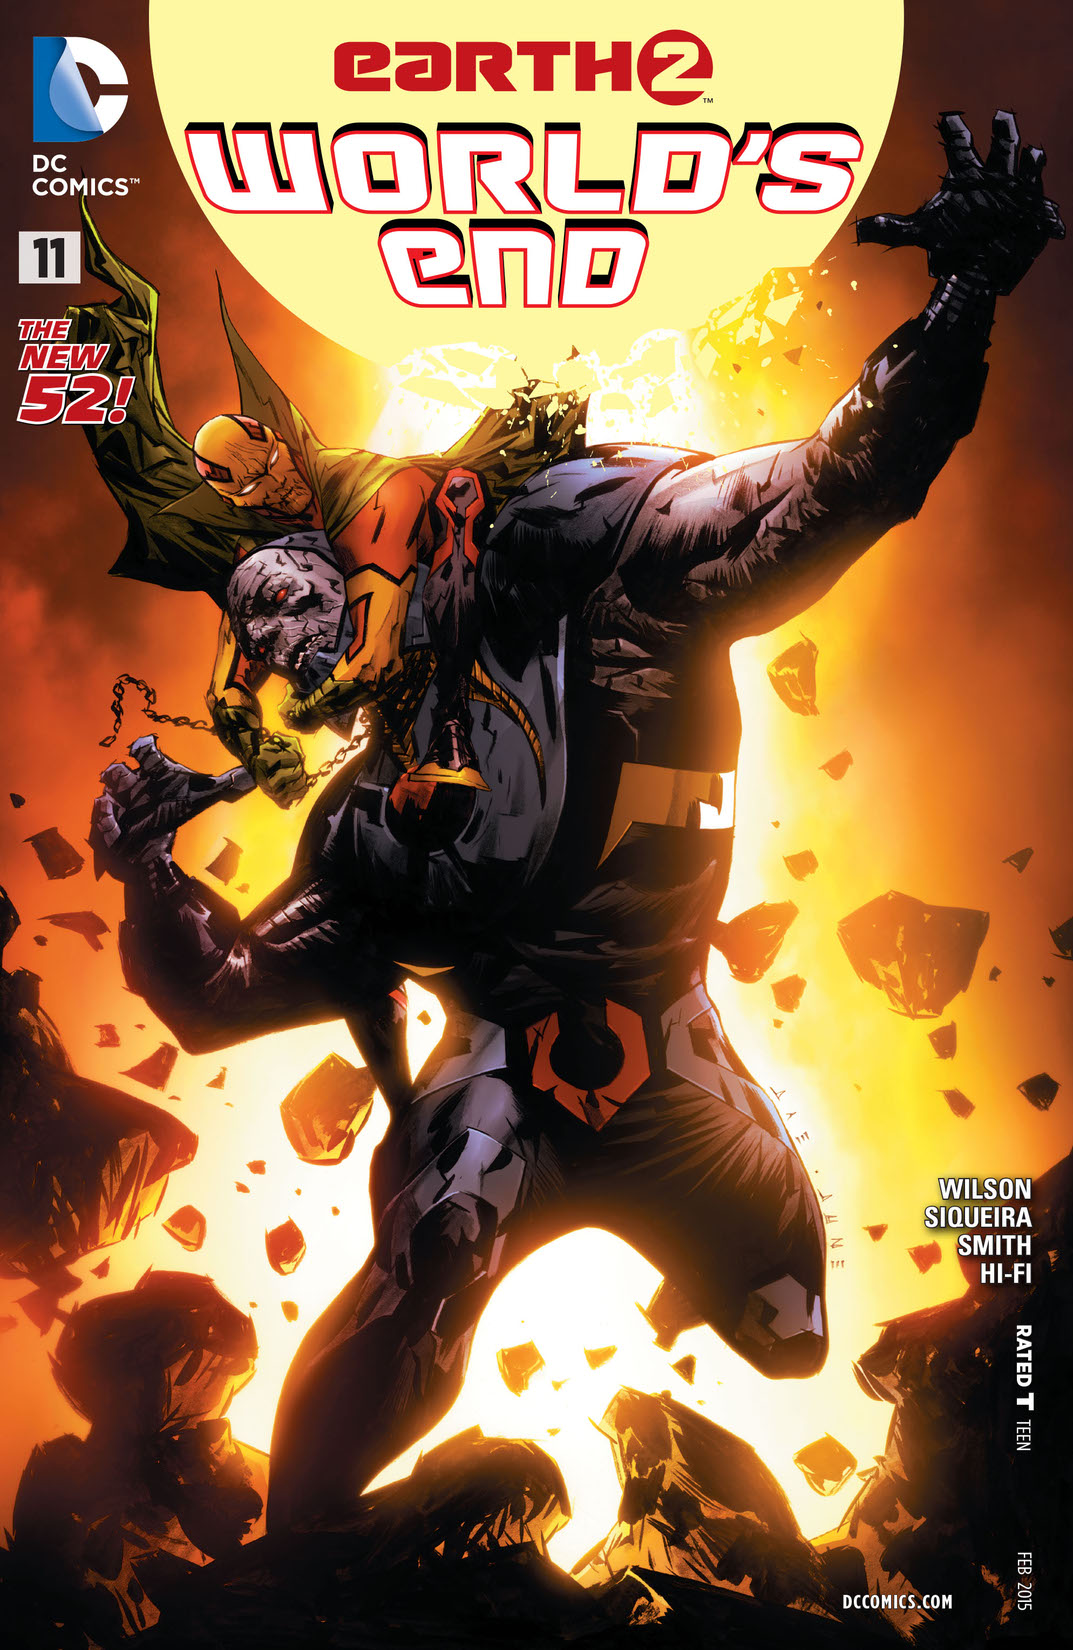 Earth 2: World's End #11 preview images